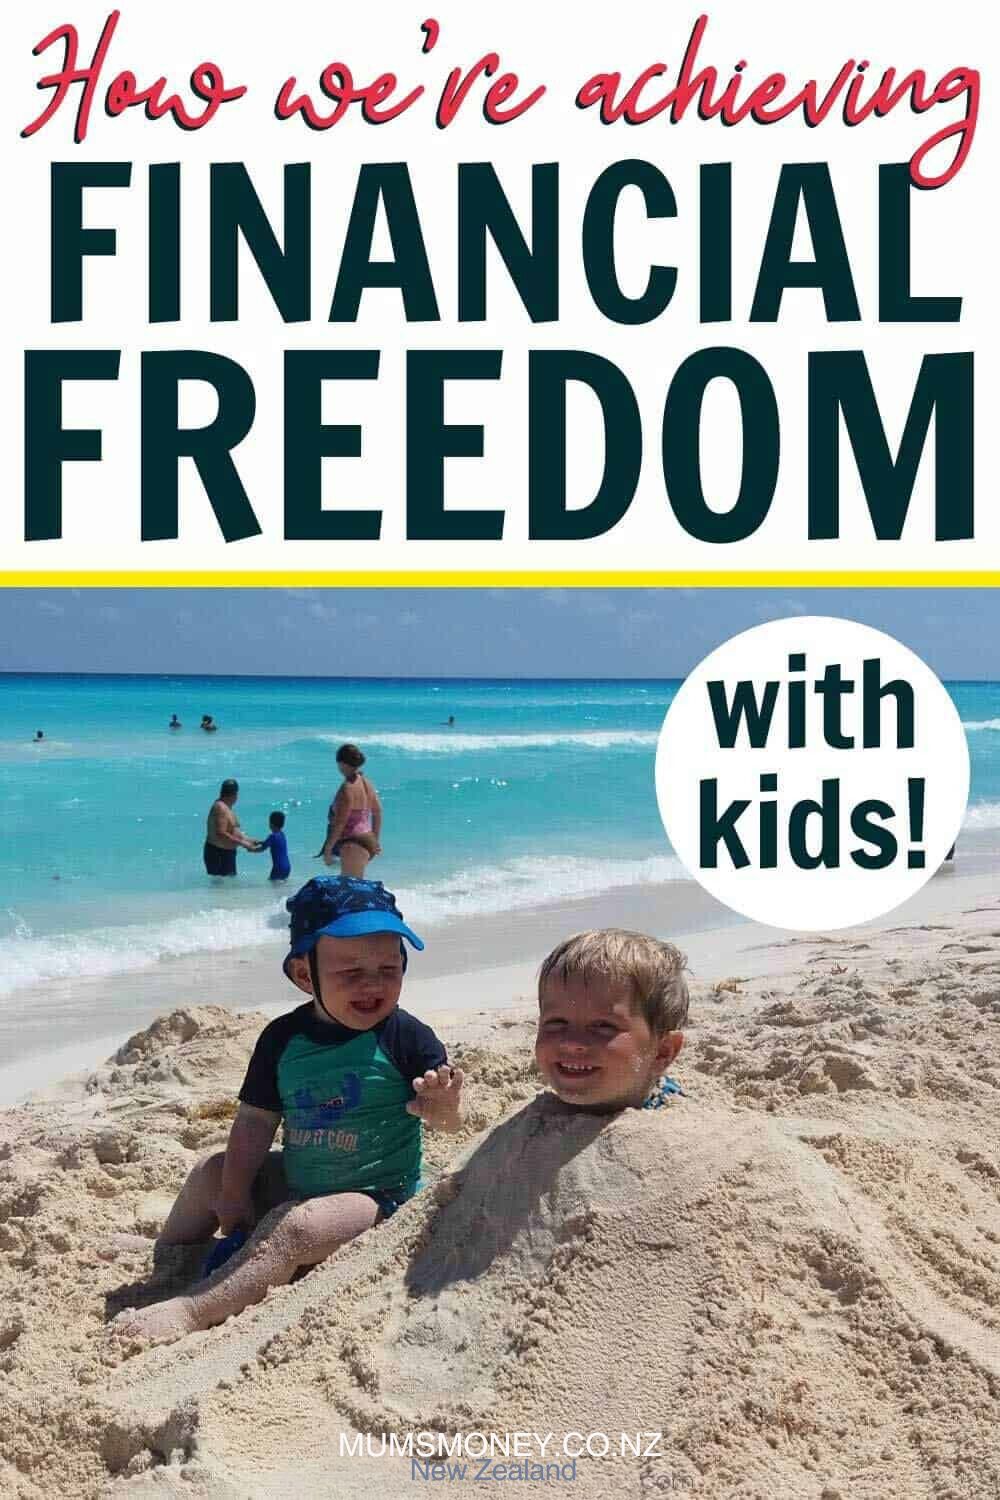 Financial Freedom With A Family_Kids on beach